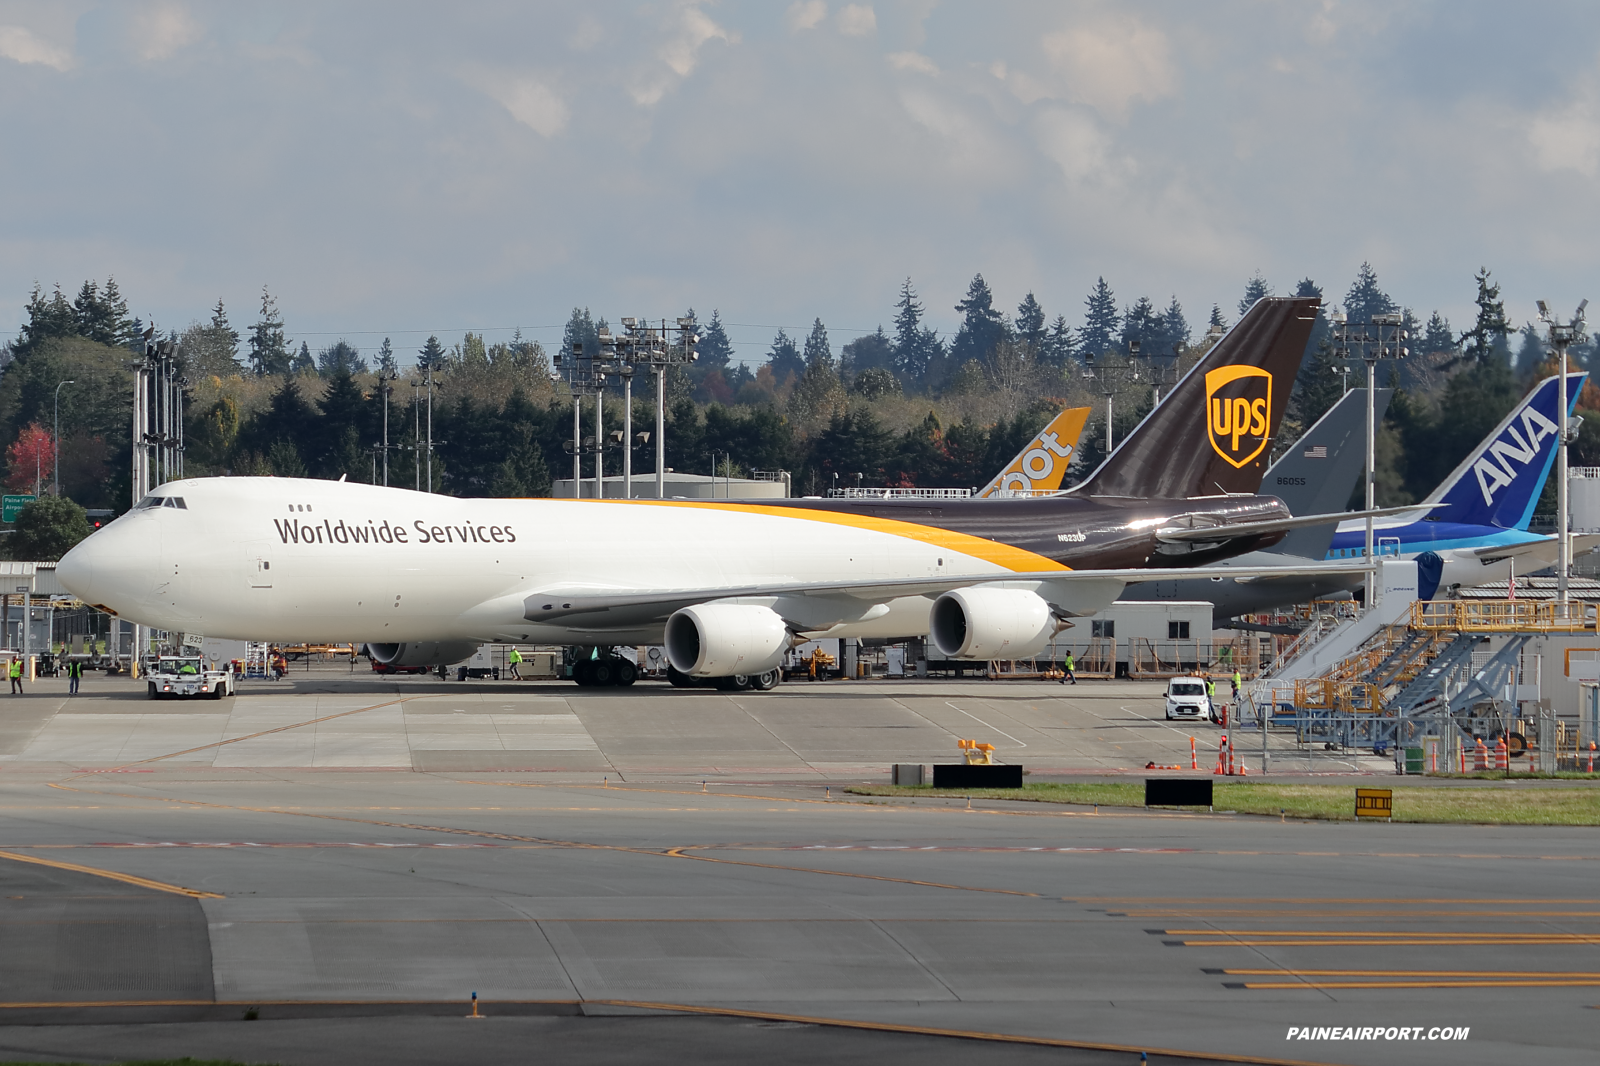 UPS 747-8F N623UP at KPAE Paine Field